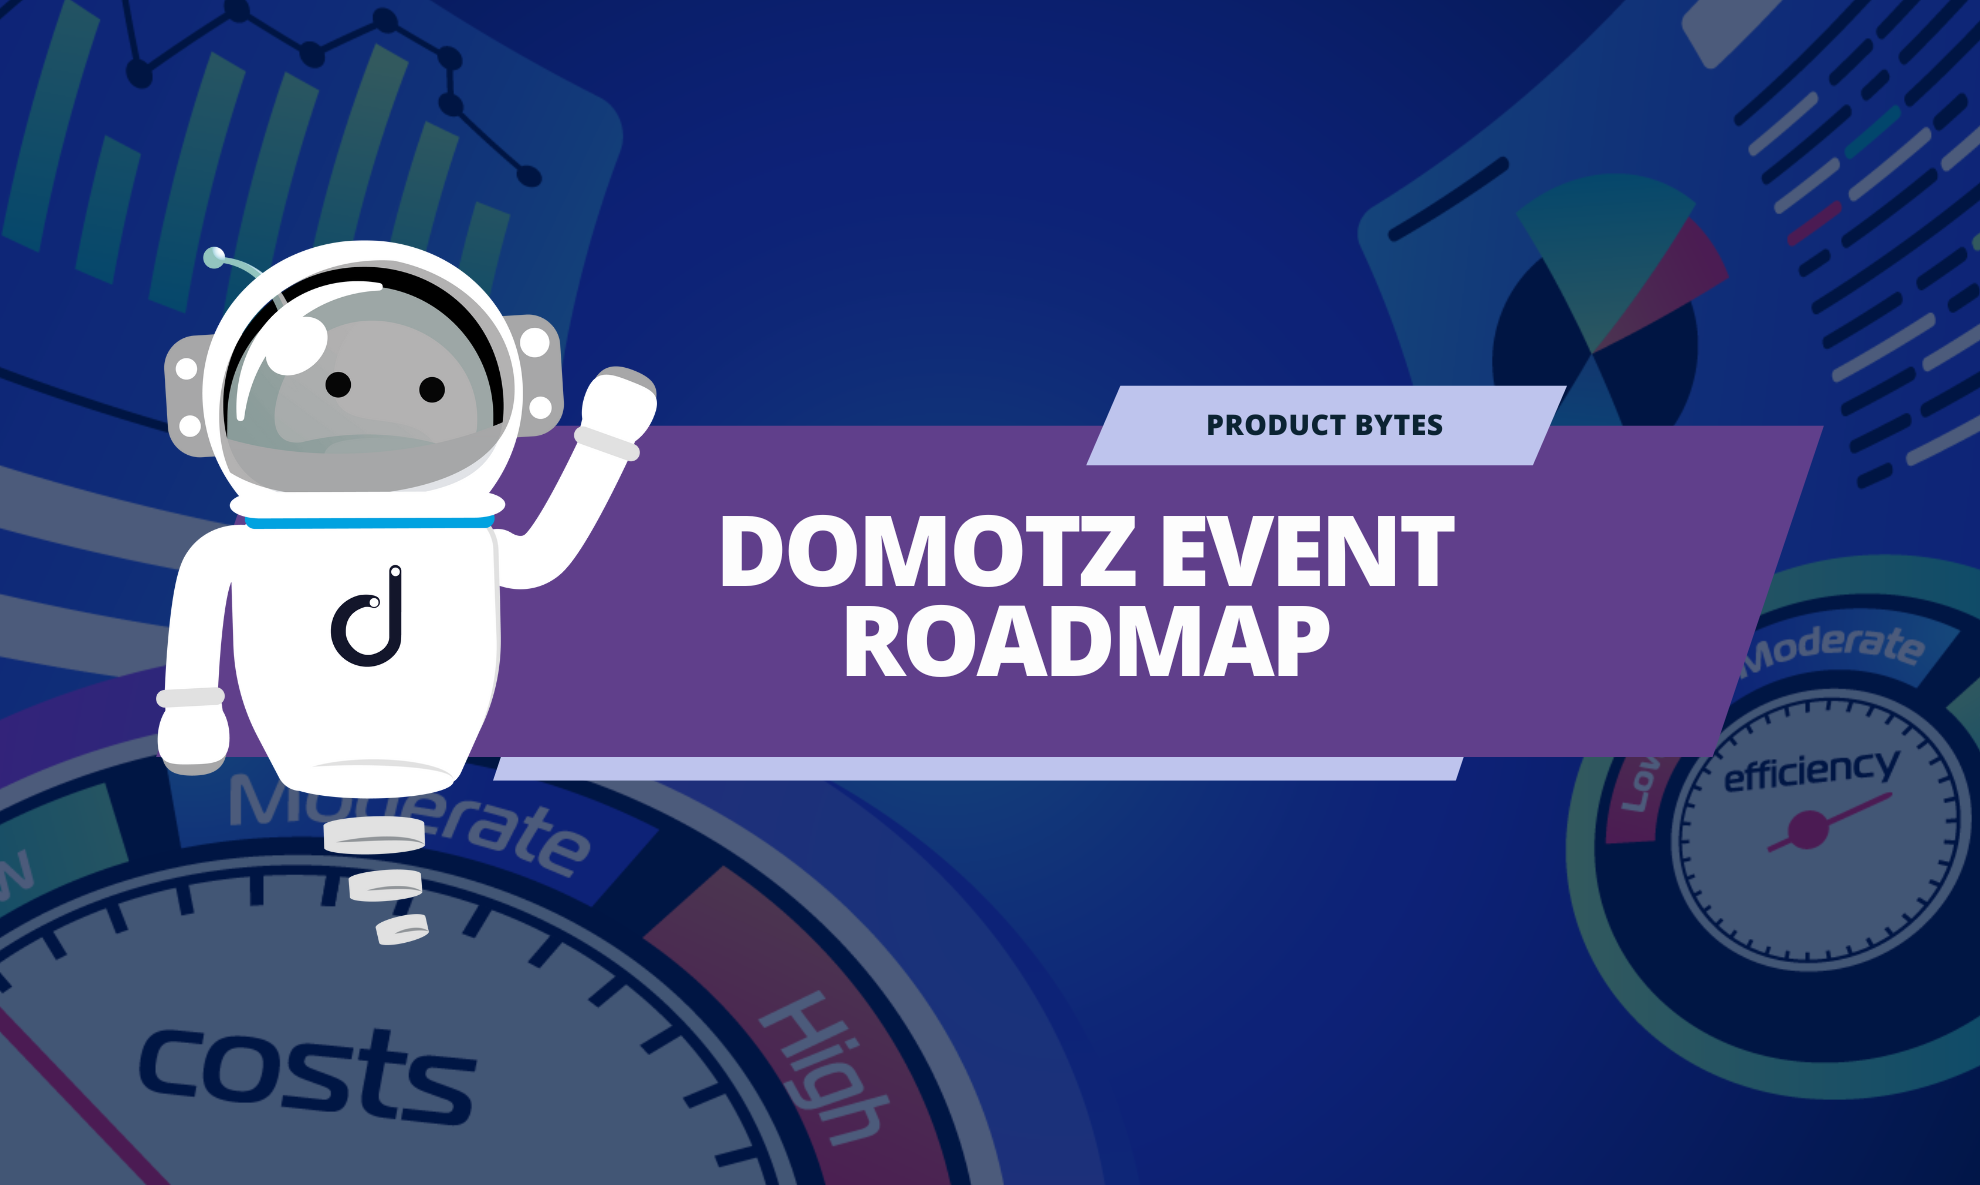 Domotz Event Roadmap: Meet Us and Experience Innovation